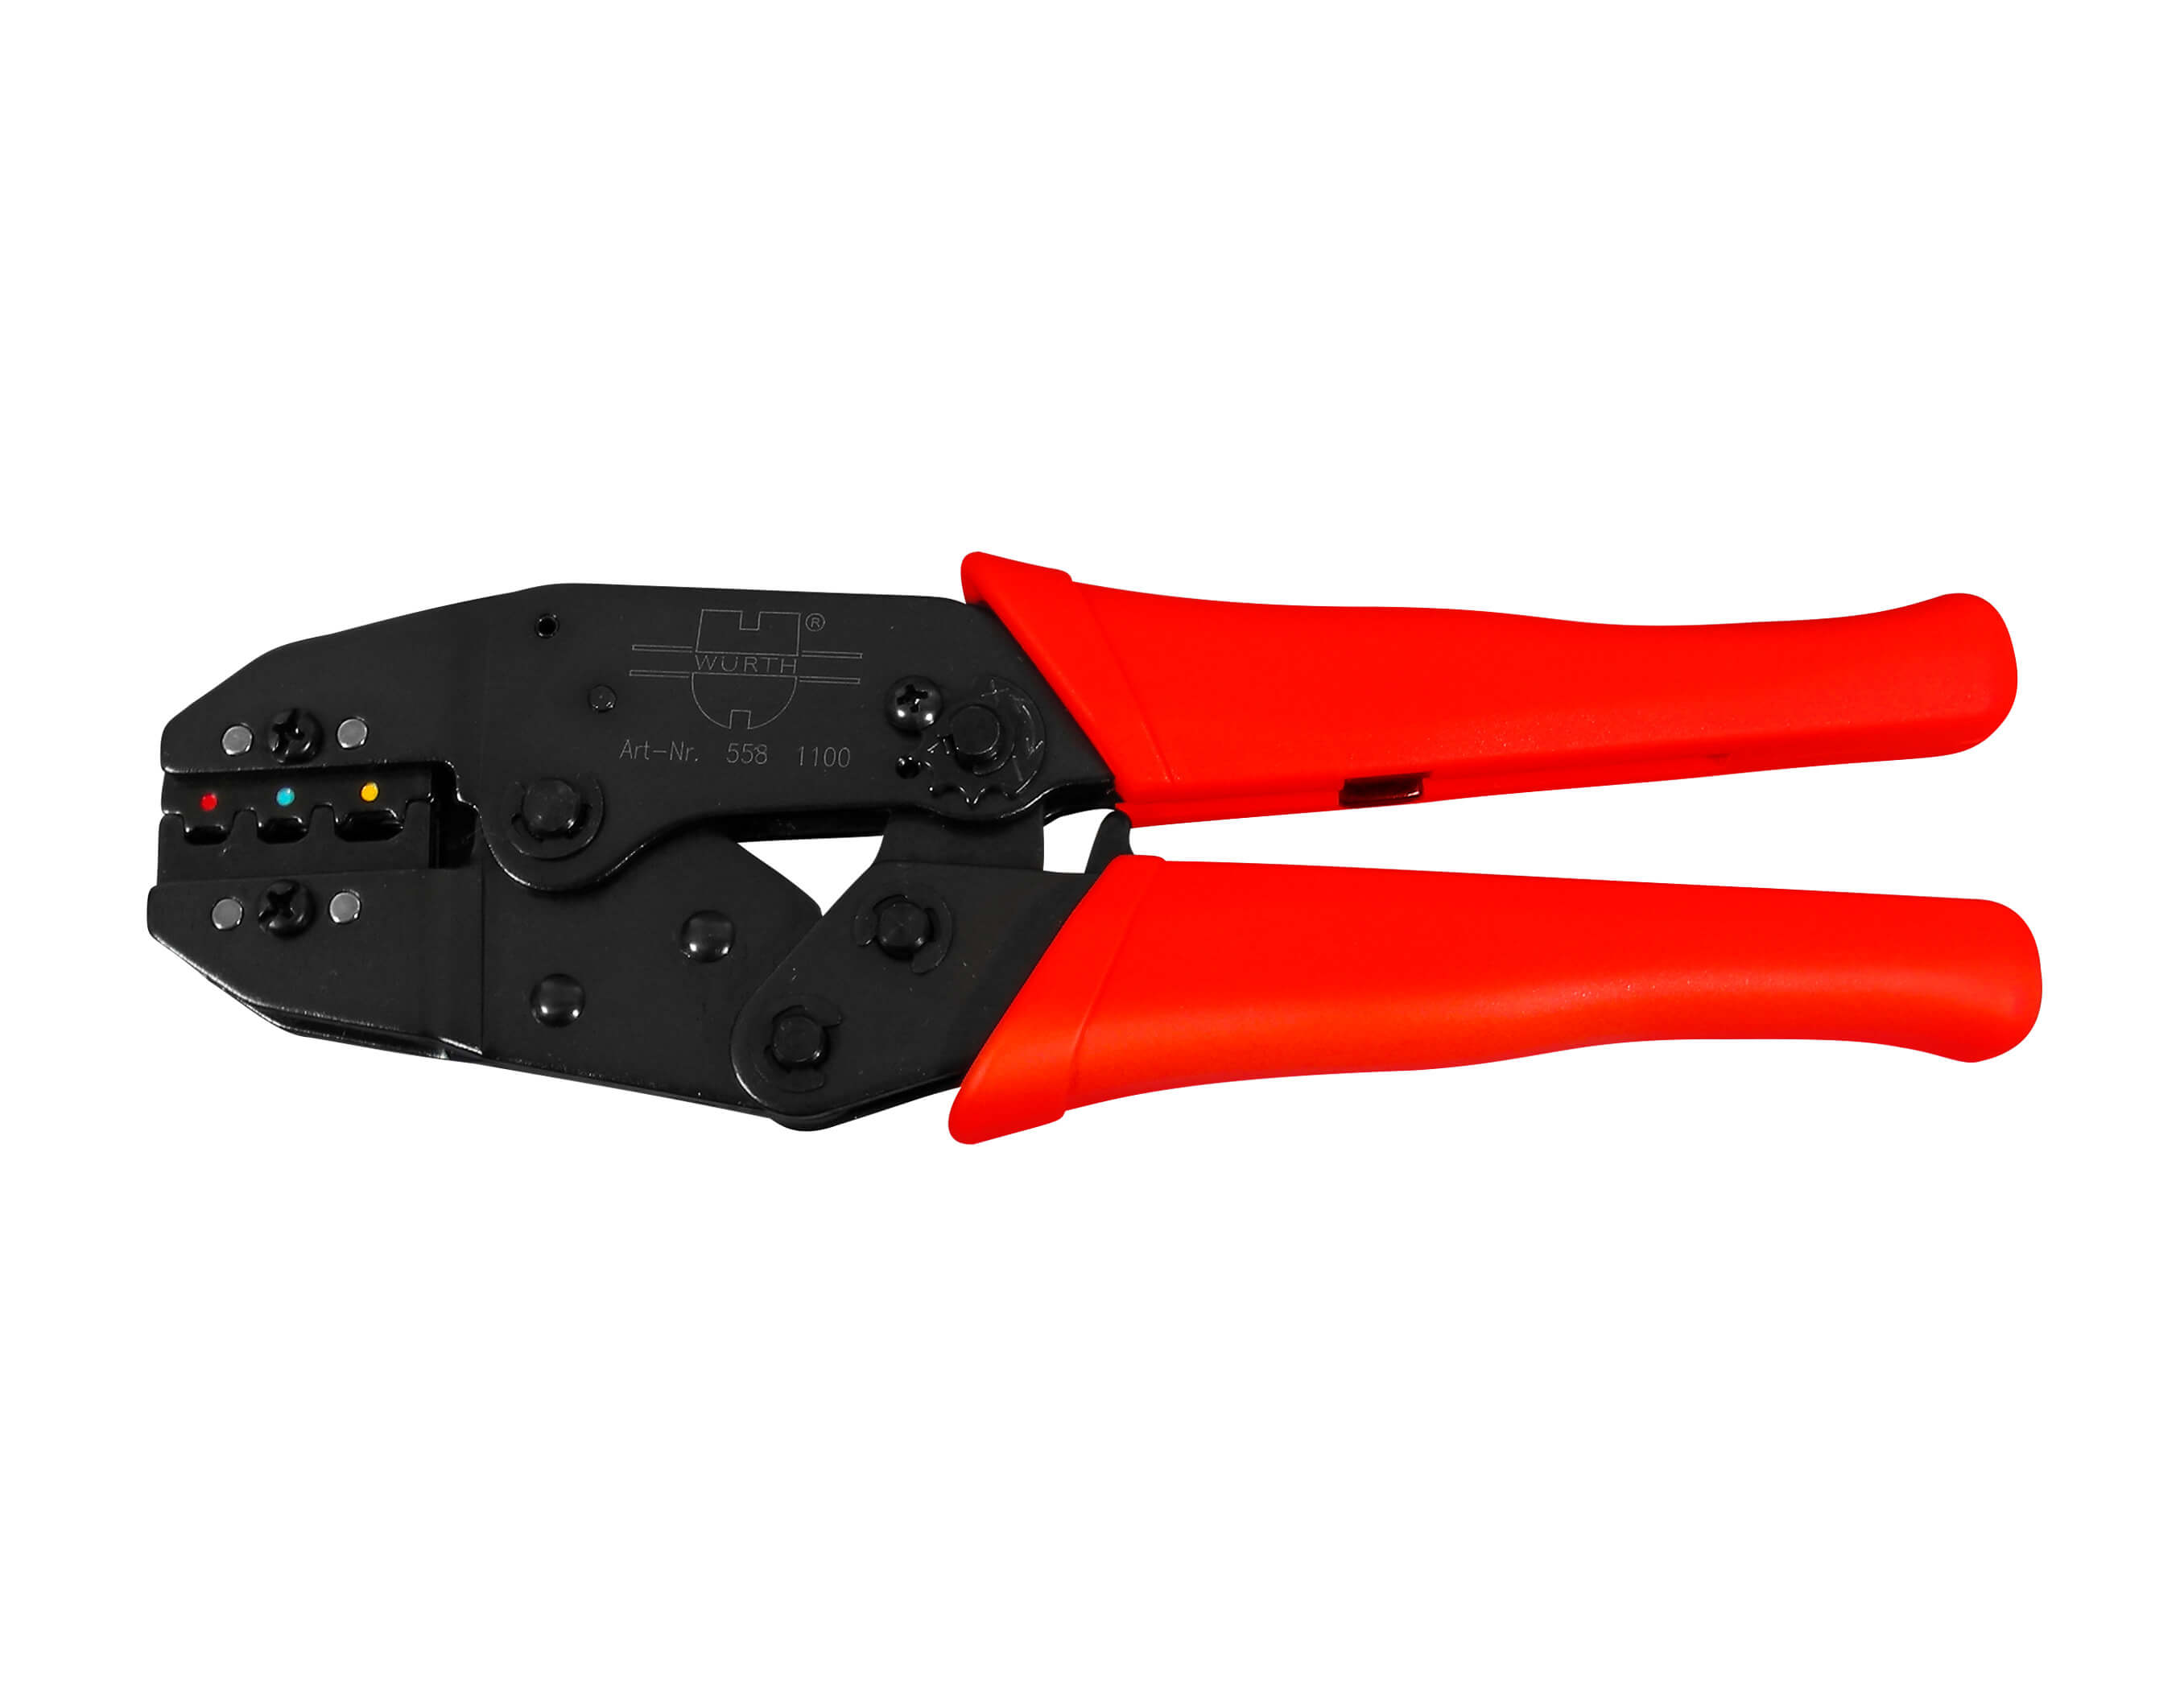 H/D RATCHET STYLE CRIMPER FOR INSULATED CONNECTORS